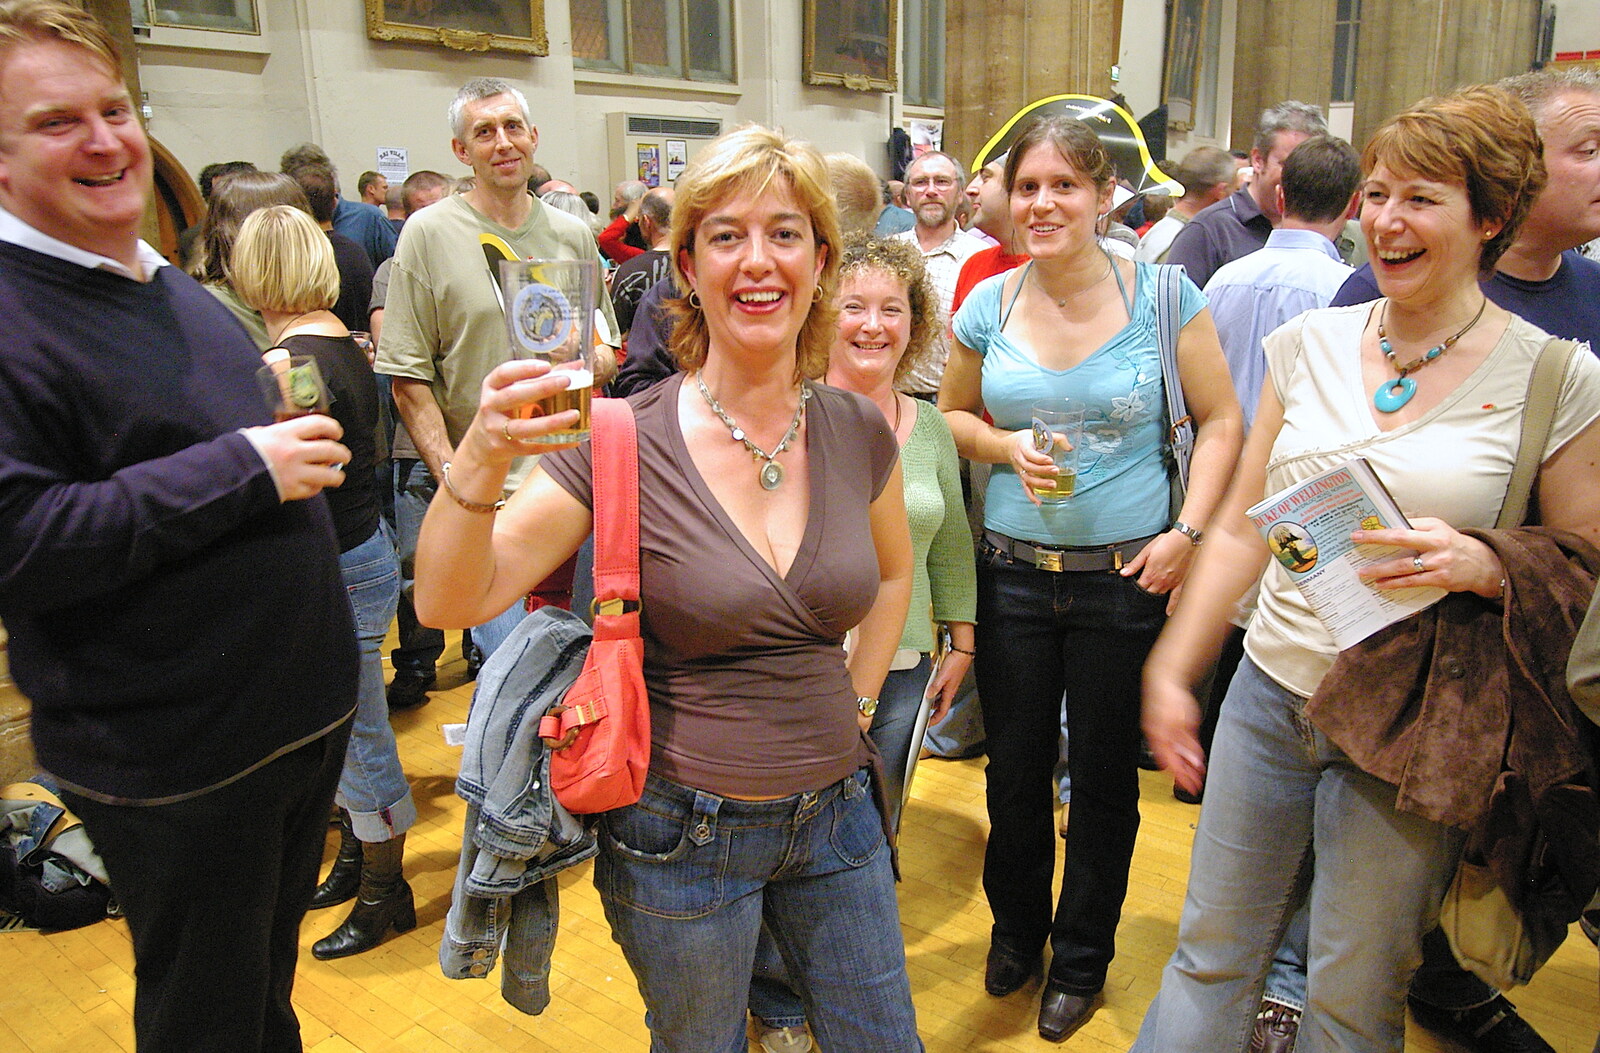 The 28th Norwich Beer Festival, St. Andrew's Hall, Norwich - 26th October 2005: Crowd scenes